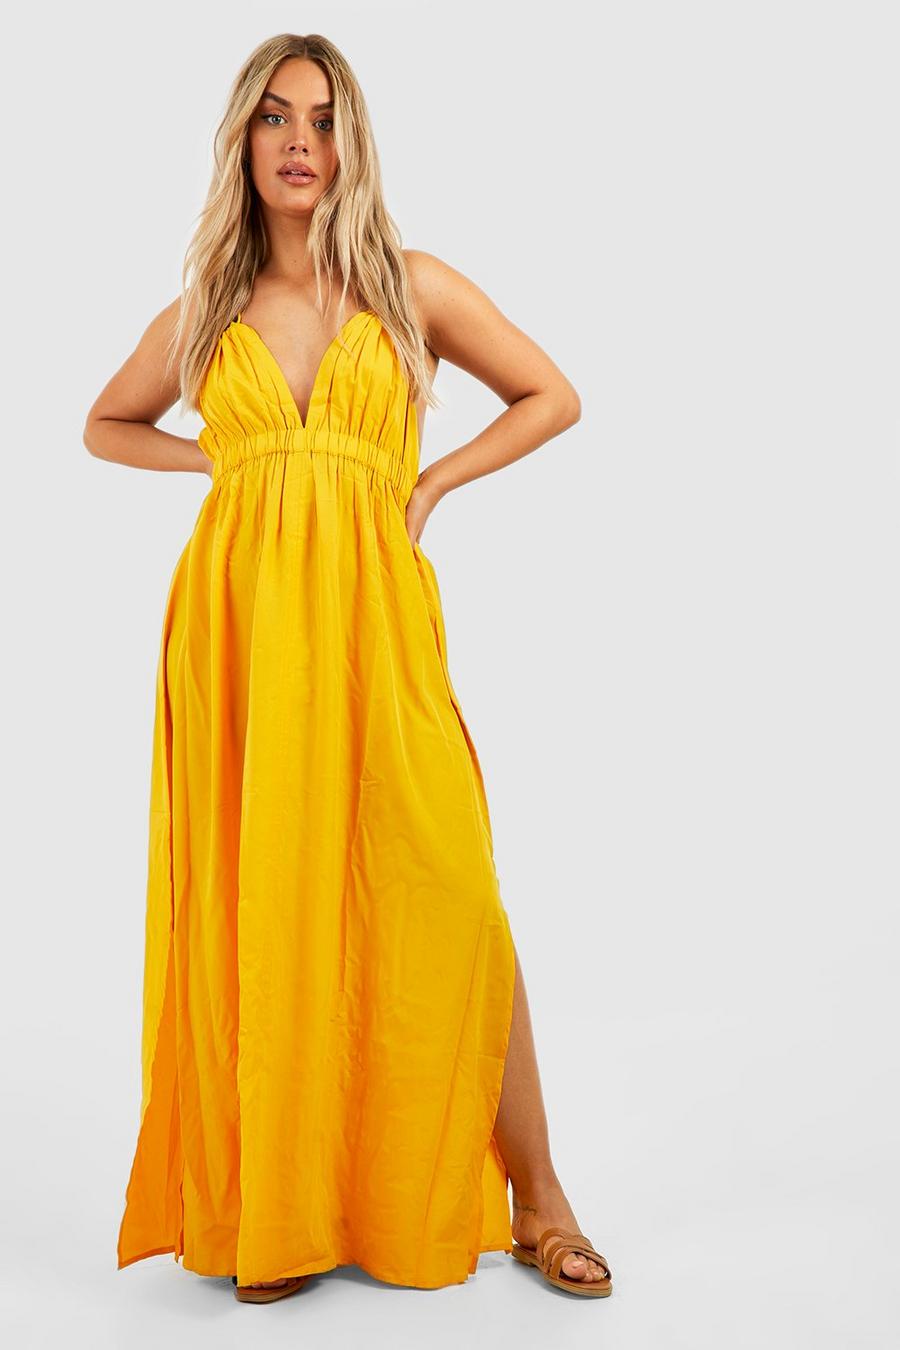 Mustard All Occasion Dresses